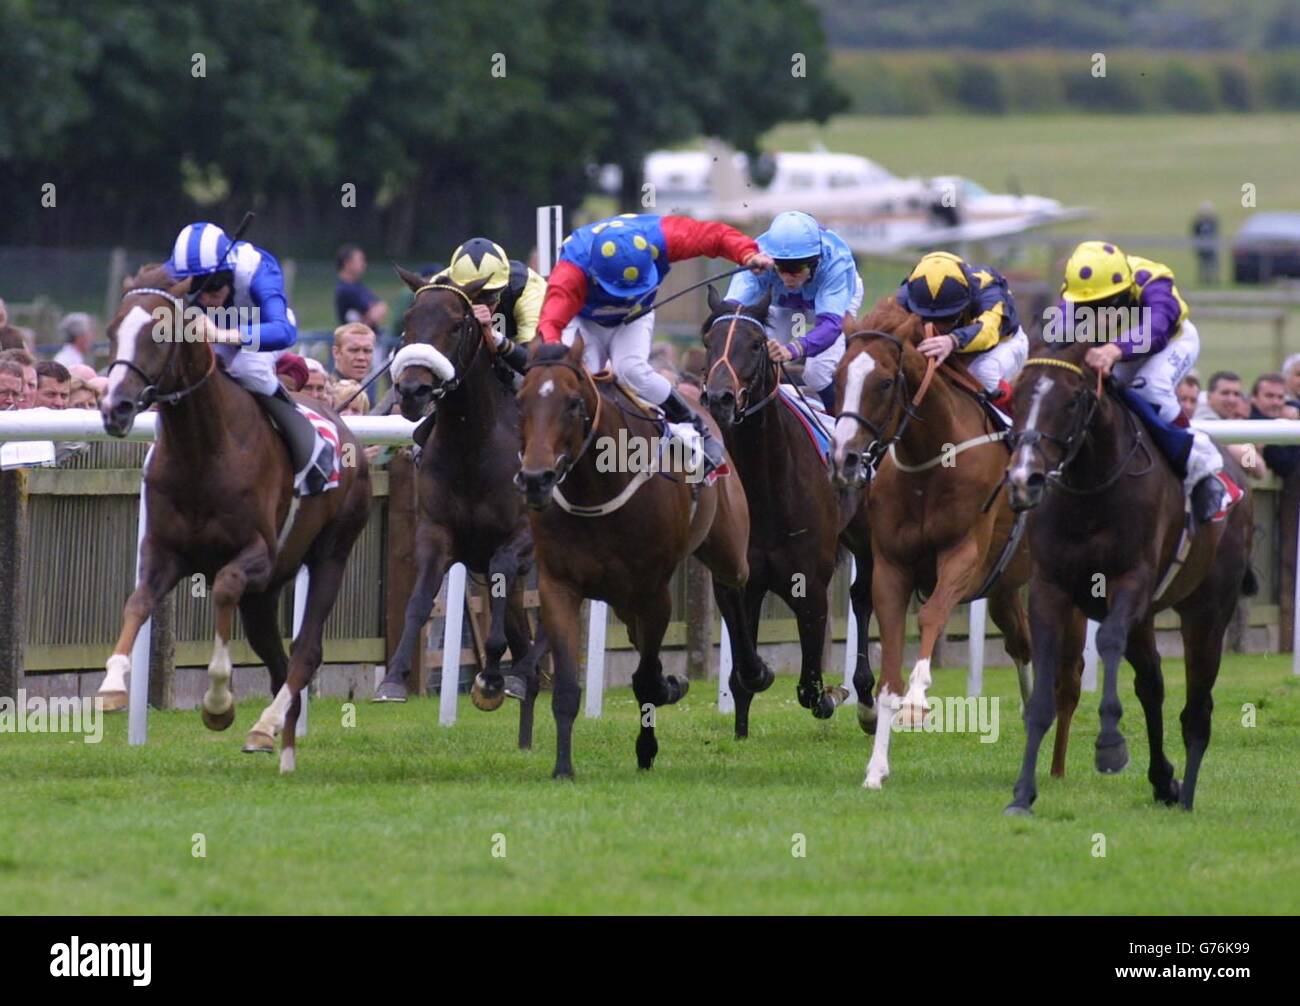 Eastern Breeze ridden by Richard Quinn (R). Eastern Breeze ridden by Richard Quinn (right) wins the Group Rated Stakes Class C Handicap at Newmarket. Stock Photo